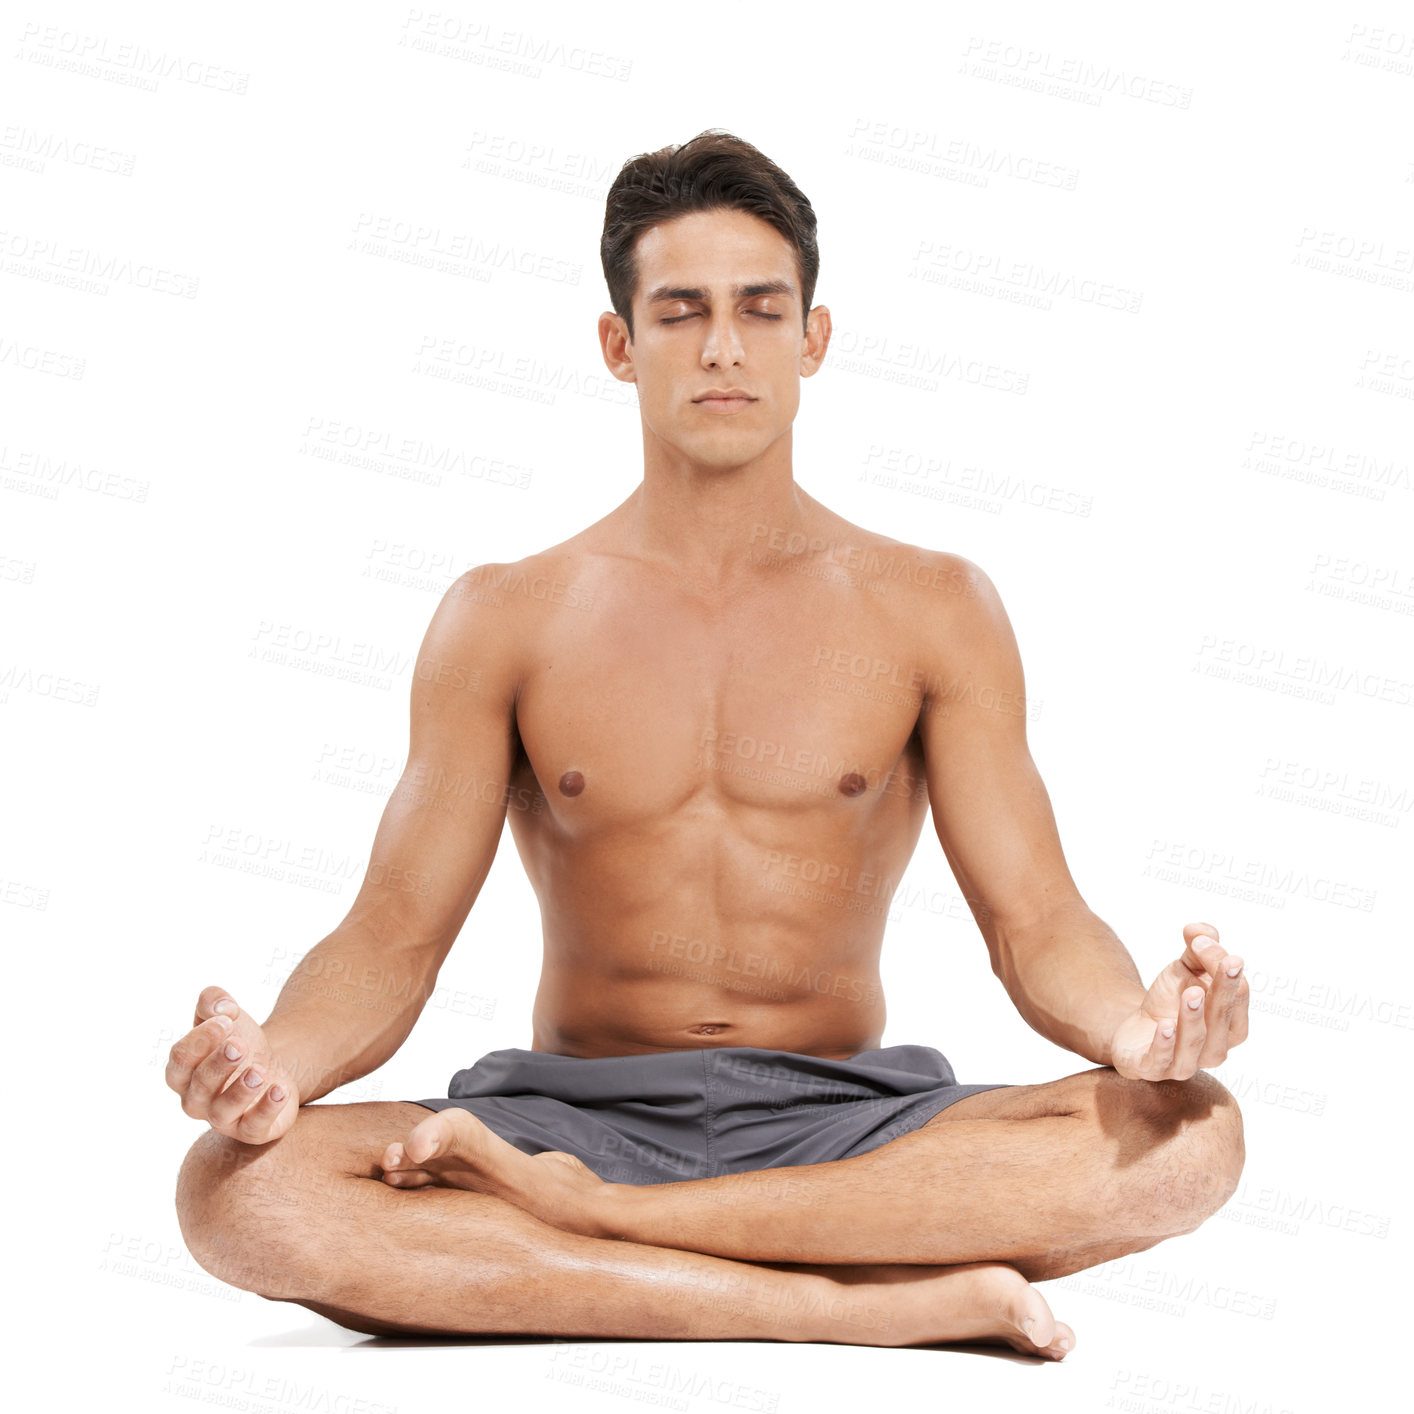 Buy stock photo A handsome young man doing yoga on a white background